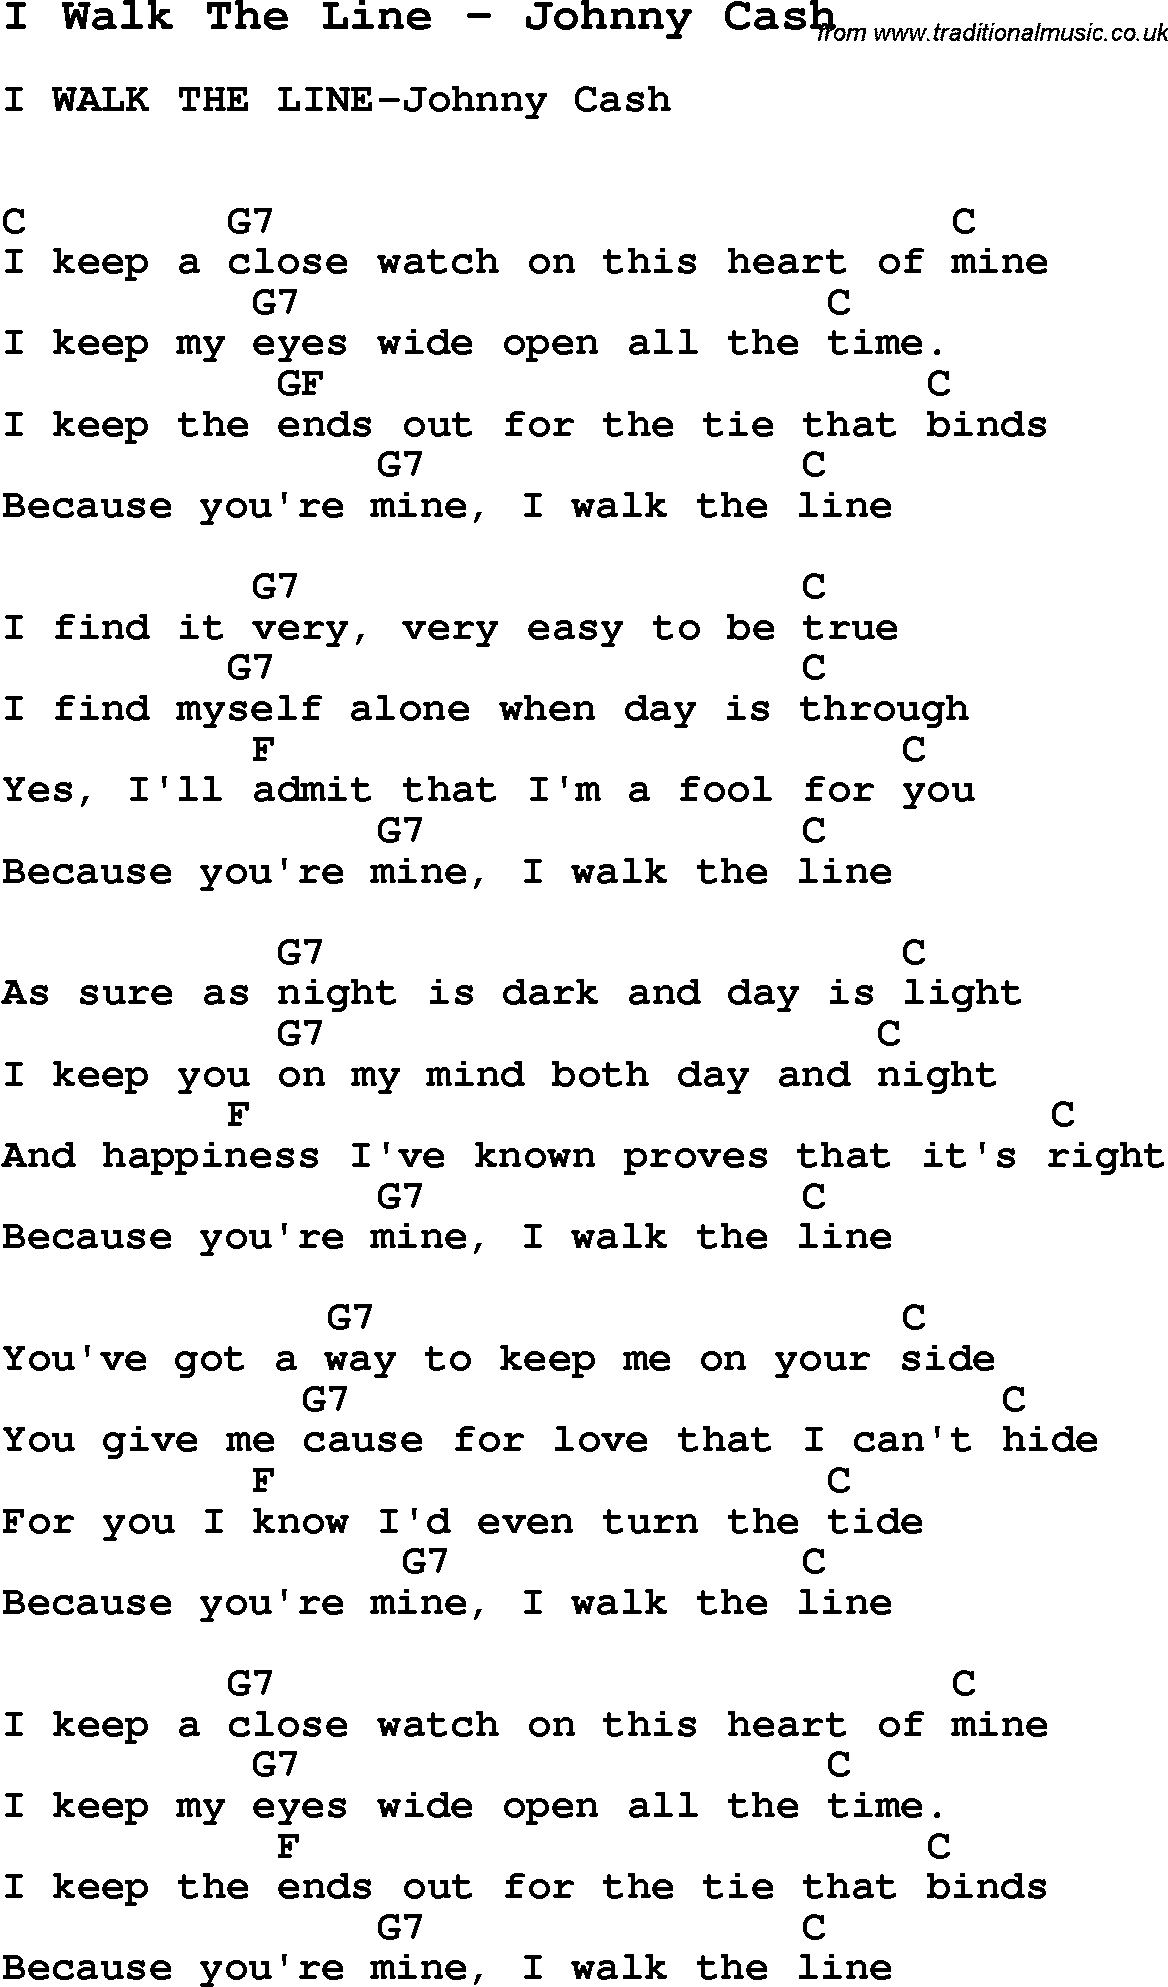 Song I Walk The Line by Johnny Cash, with lyrics for vocal performance and accompaniment chords for Ukulele, Guitar Banjo etc.